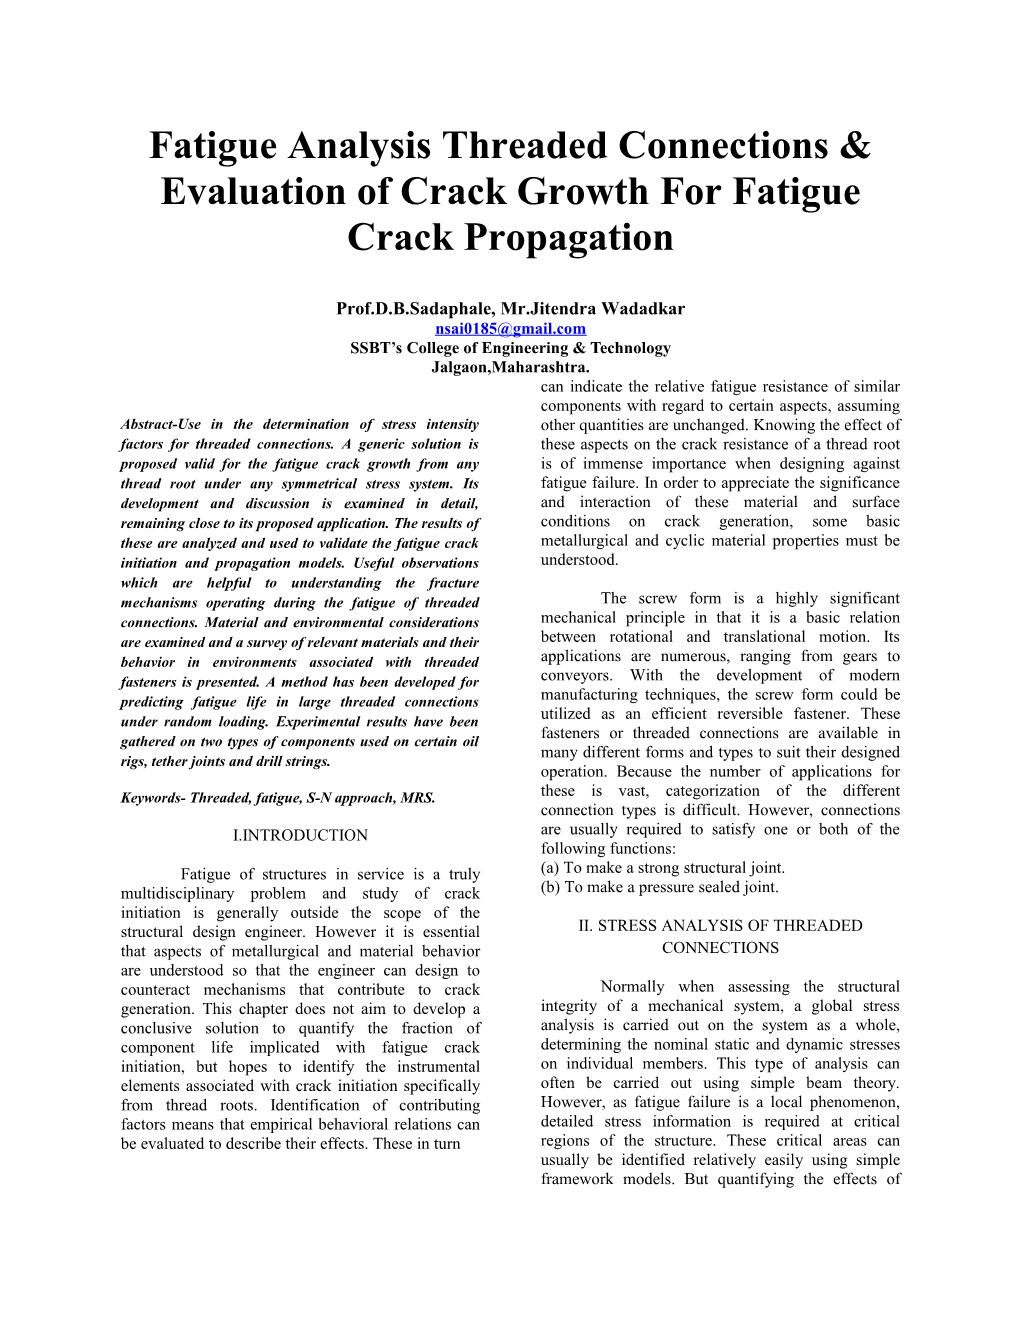 Fatigue Analysis Threaded Connections & Evaluation of Crack Growth for Fatigue Crack